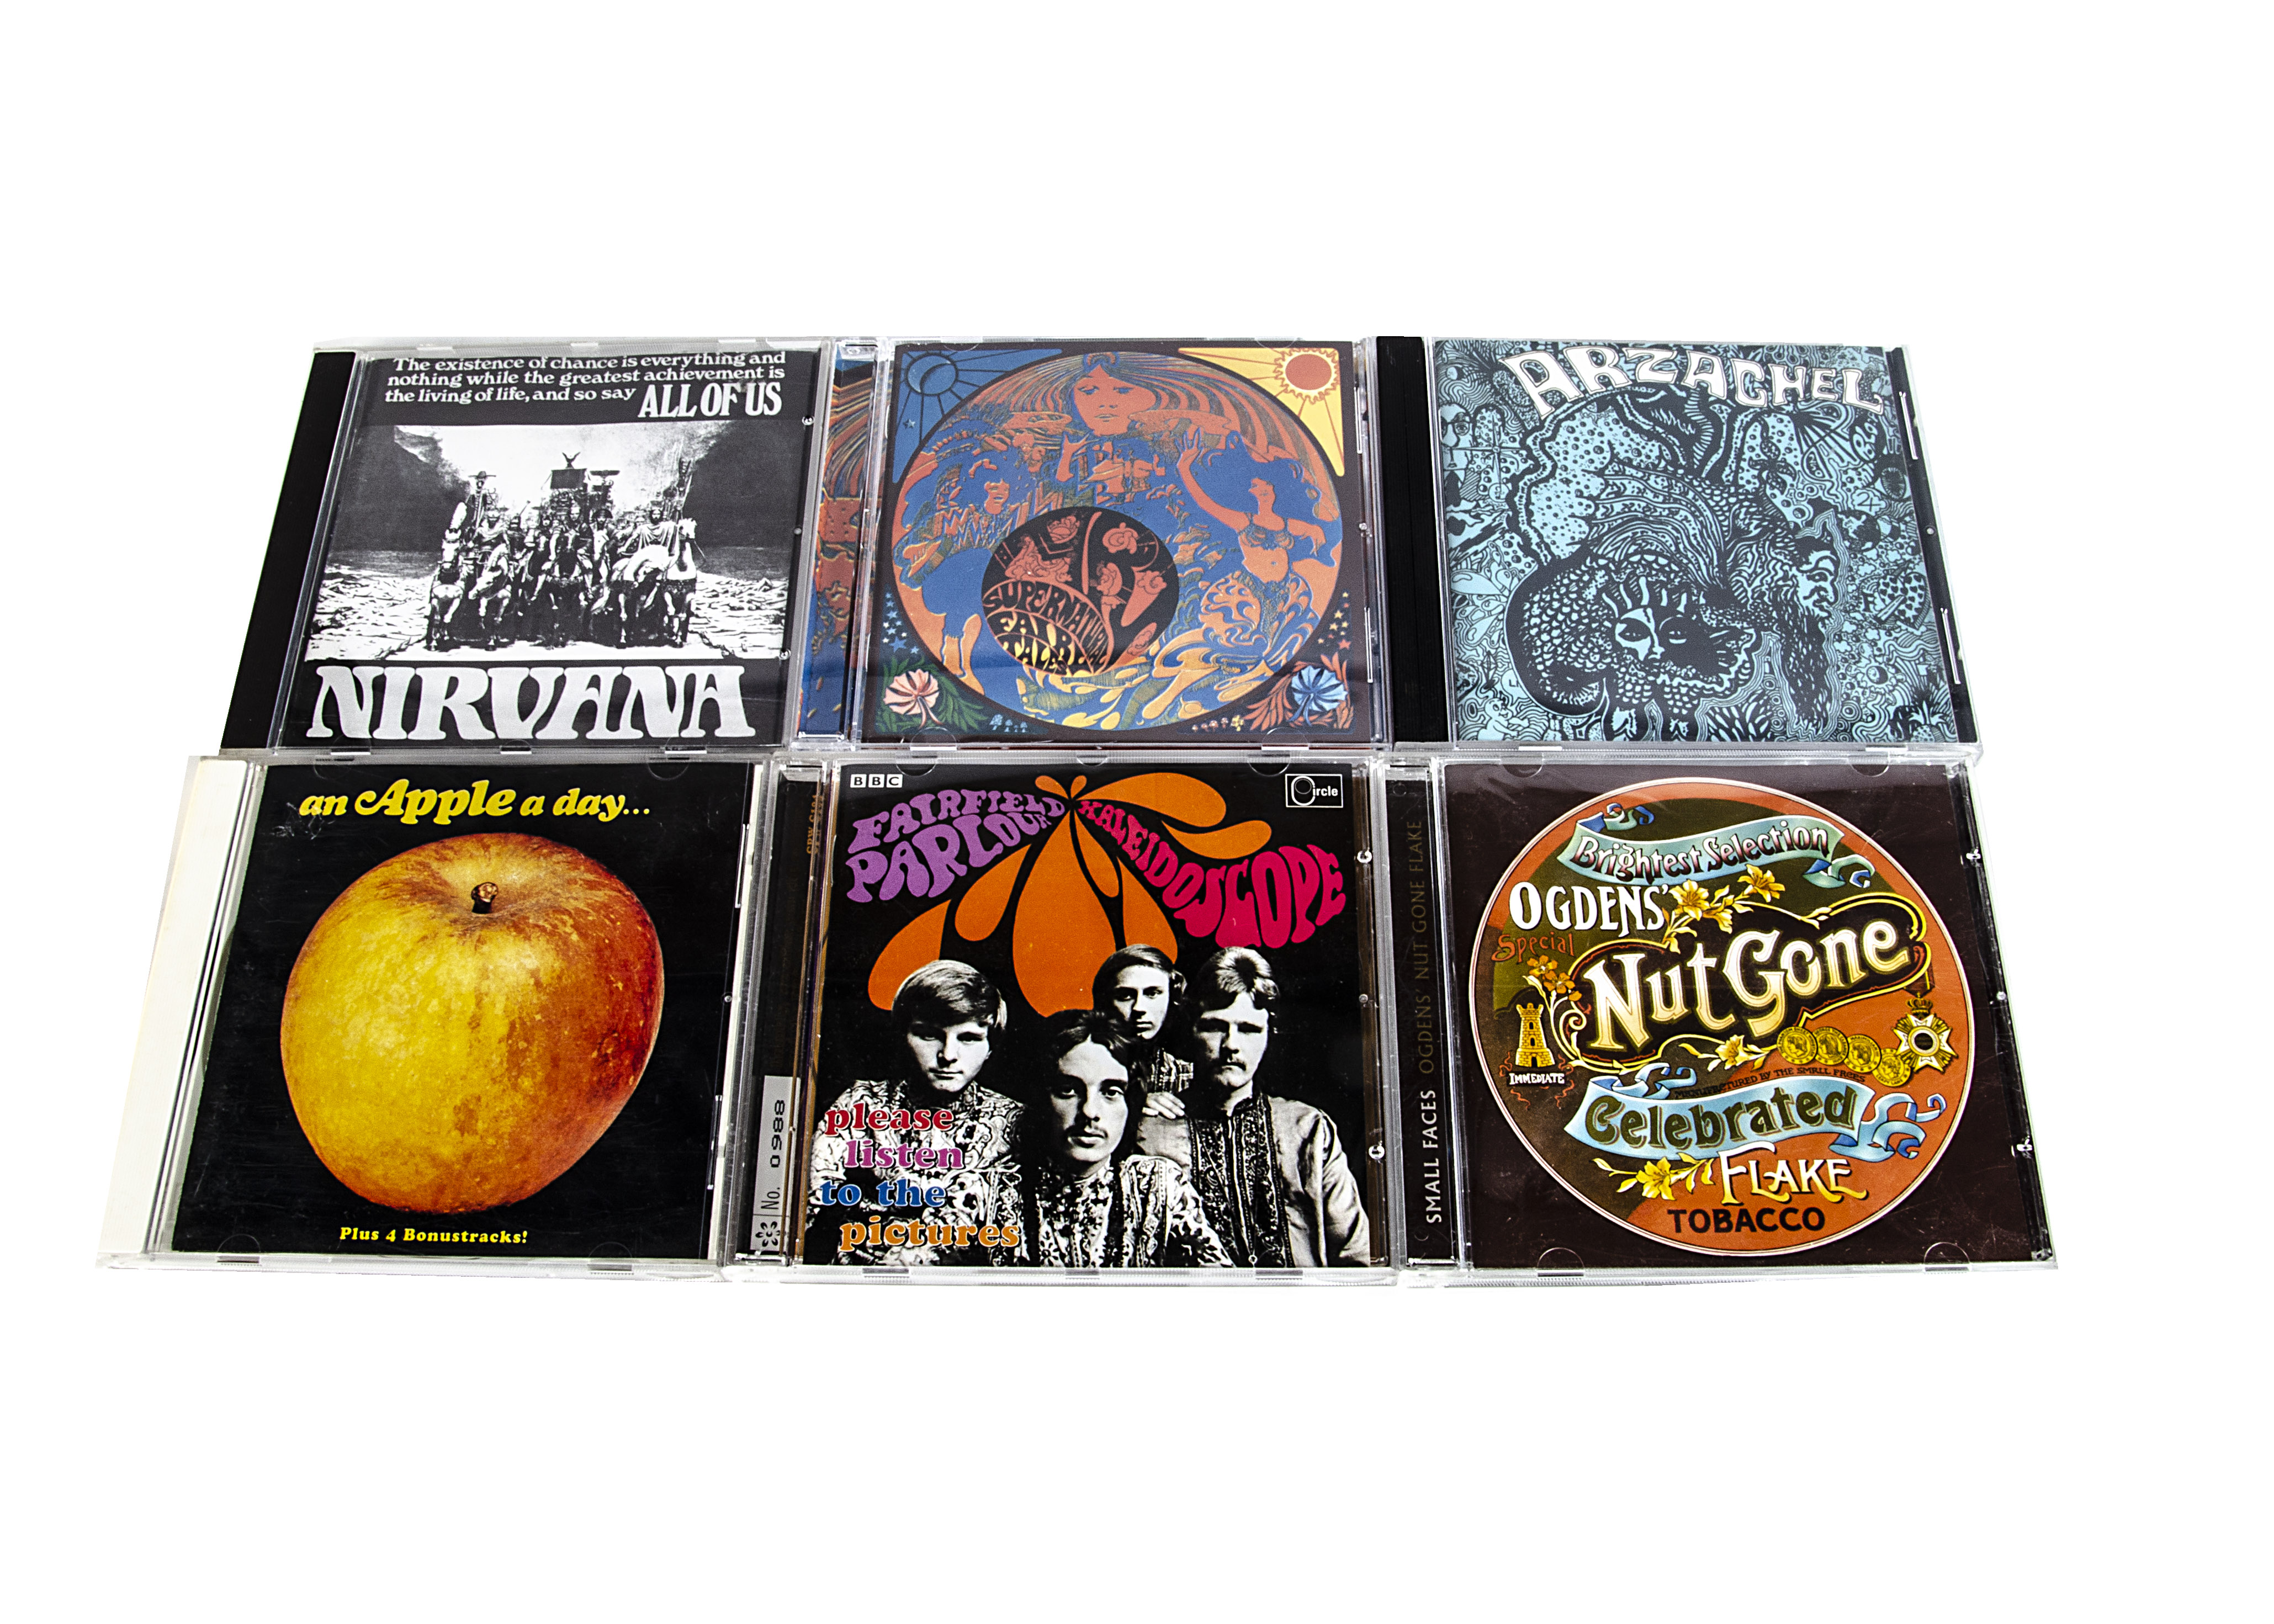 Psychedelic Rock CDs, twenty CDs of mainly Psychedelic Rock with artists including Art, Nirvana,